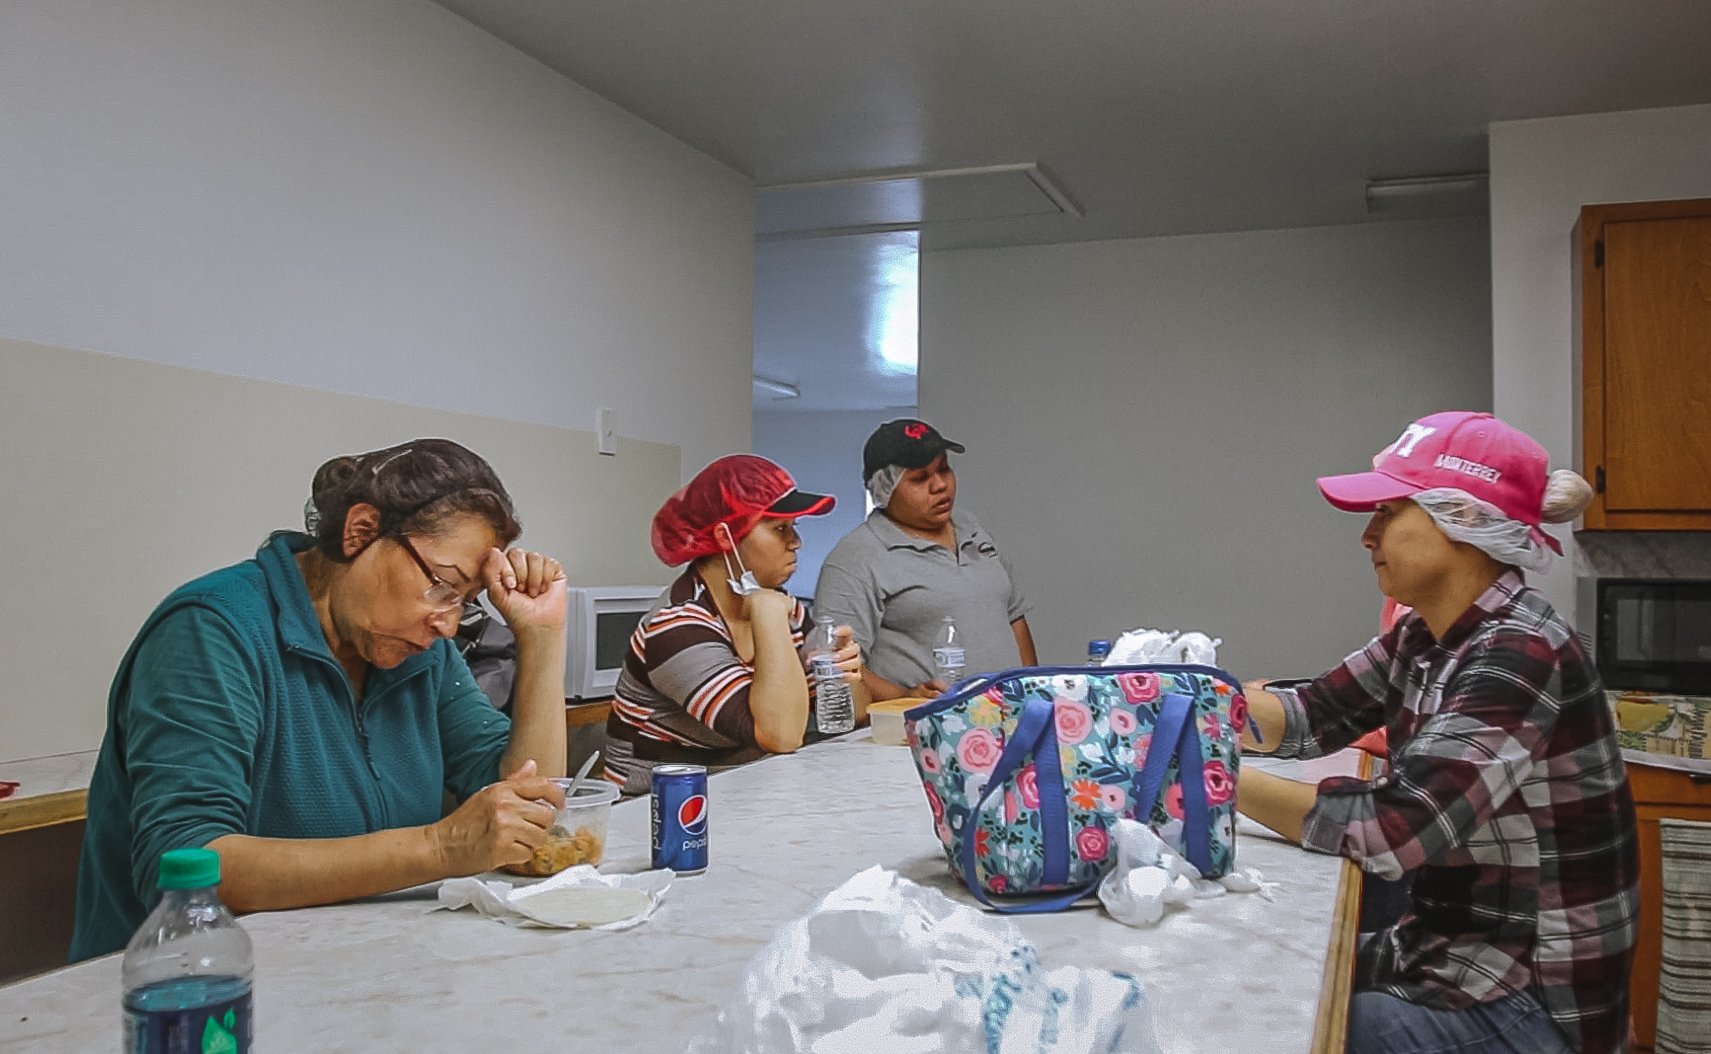  Martha Olivares Garcia, 64, of Veracruz, Mexico, takes her lunch break at one of the living quarters closest to the plant. At 64, Garcia is one of the eldest workers and can no longer pick crabs as her pace has slowed over the years. Instead, she is